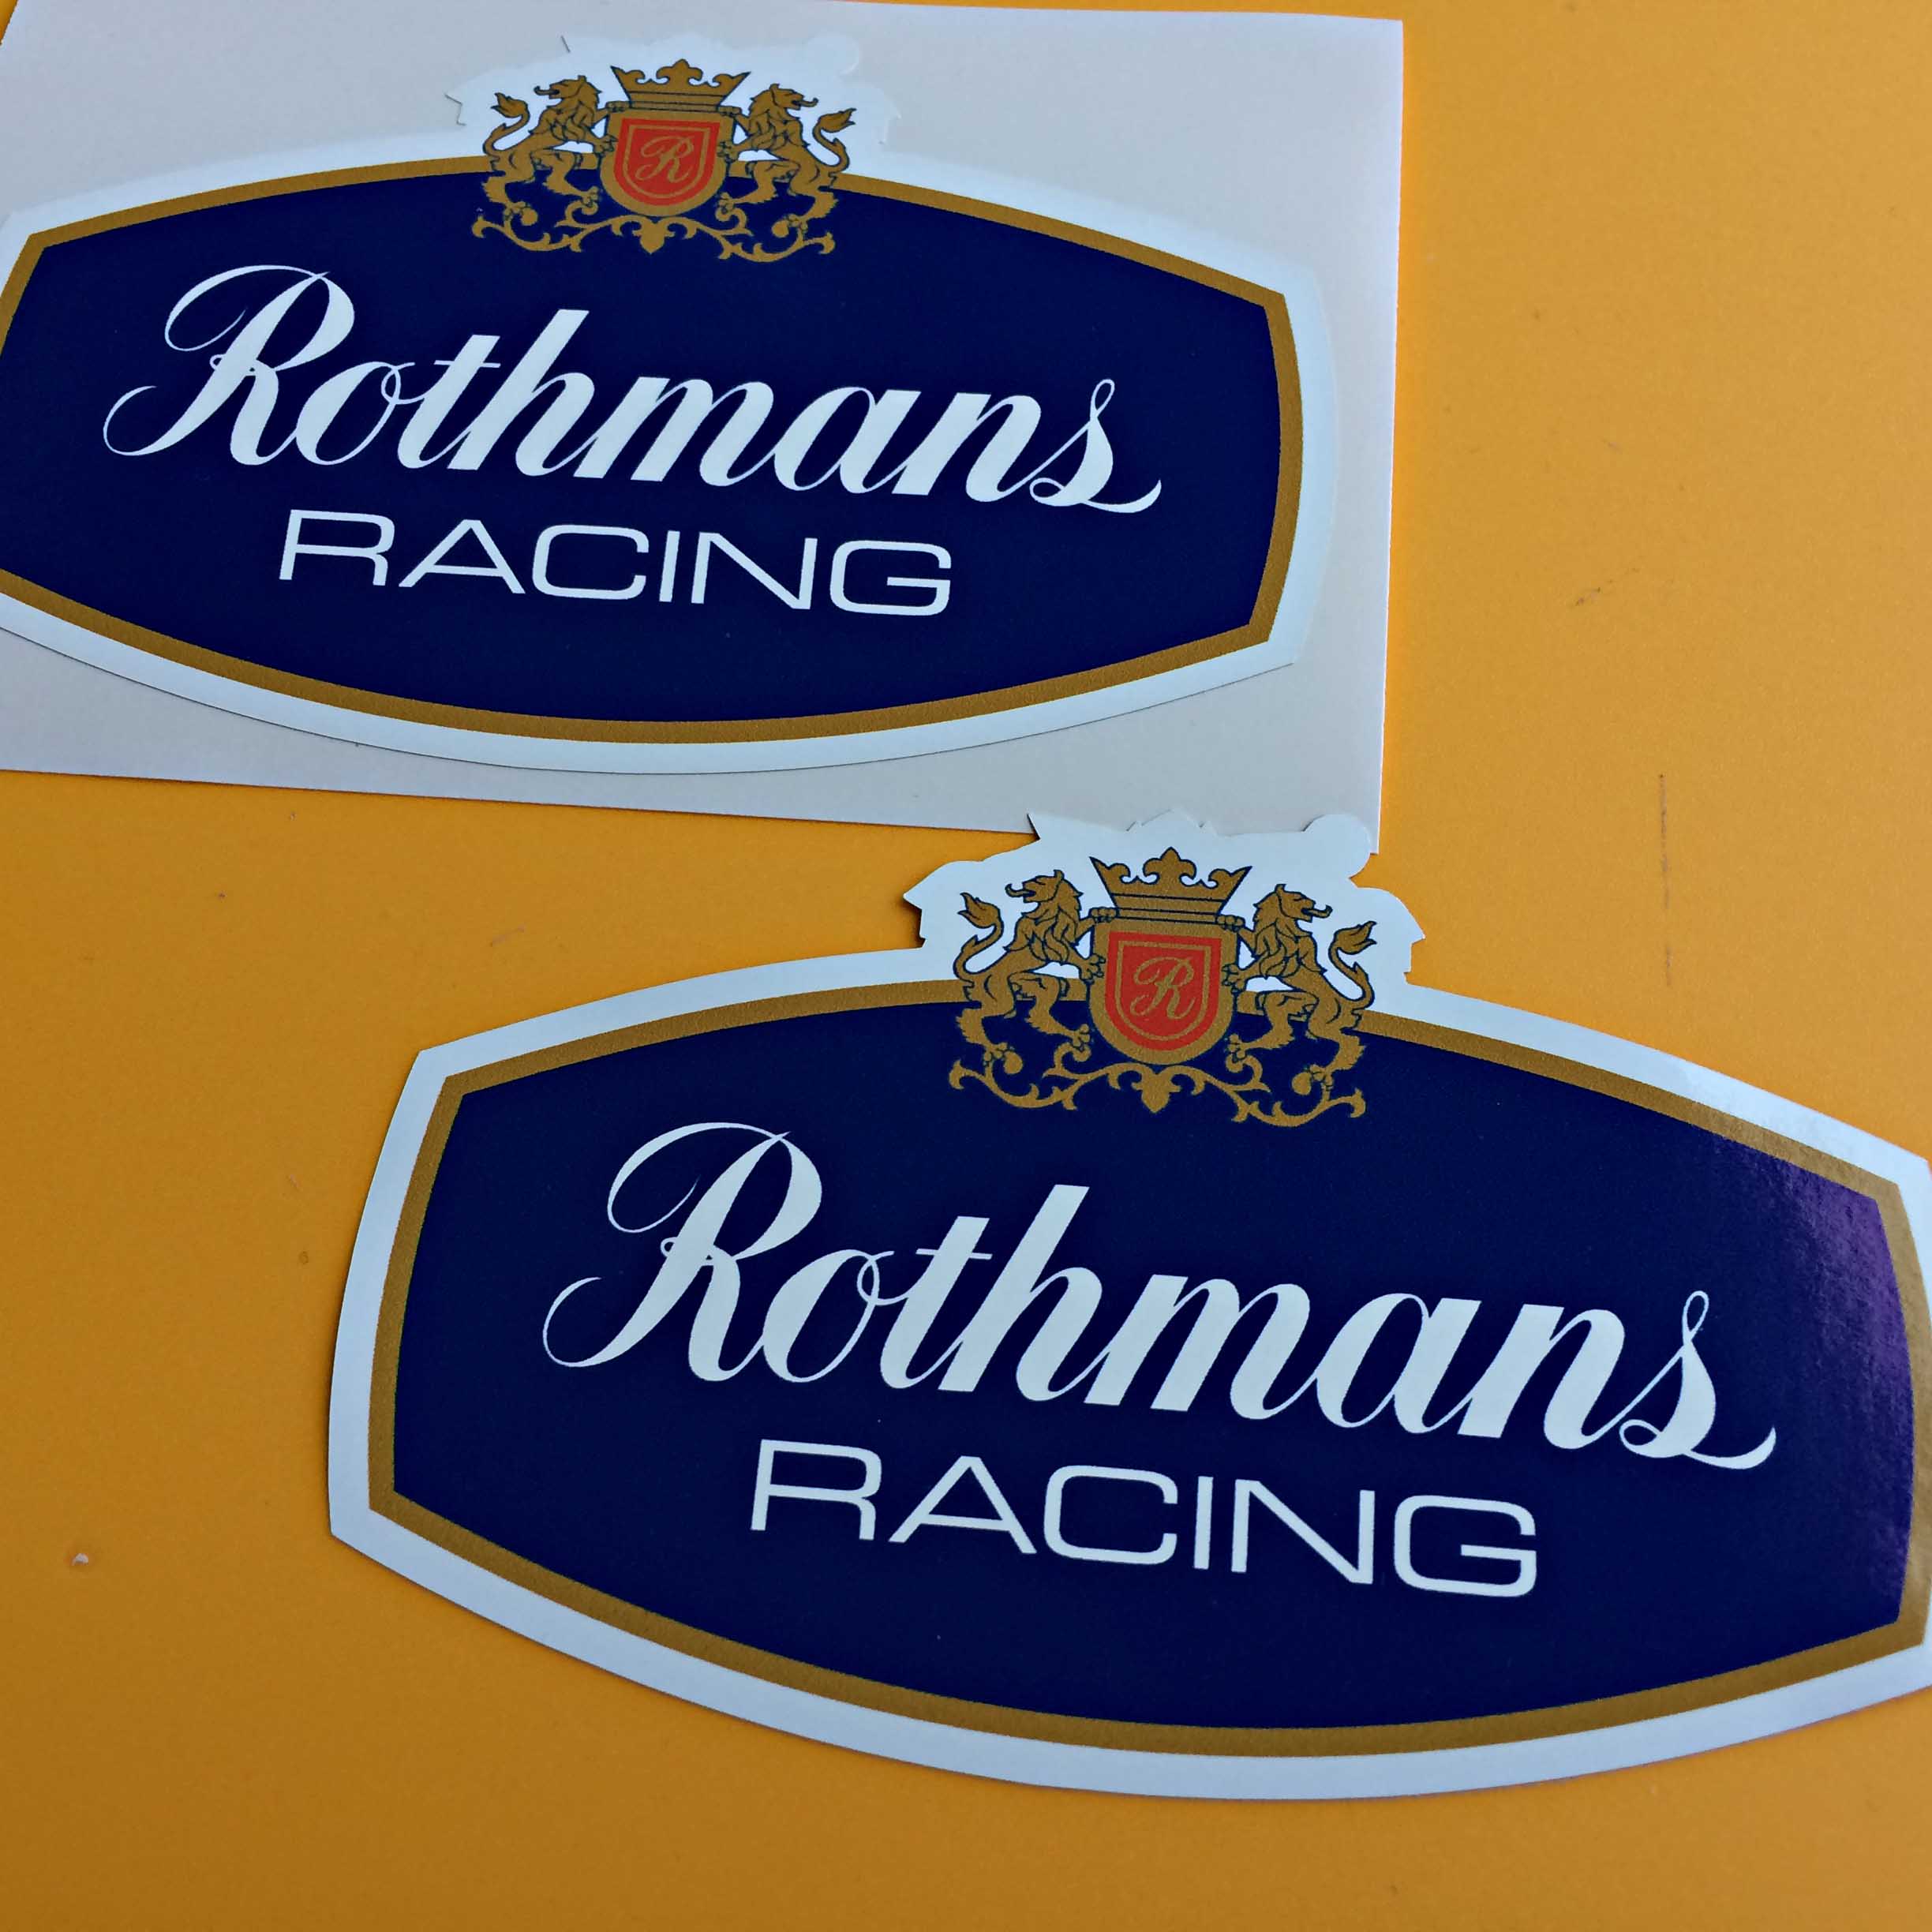 Rothmans Racing in white lettering on a blue background. Above are two golden lions either side of a gold crown and shield. The shield has a gold letter R on a red background.